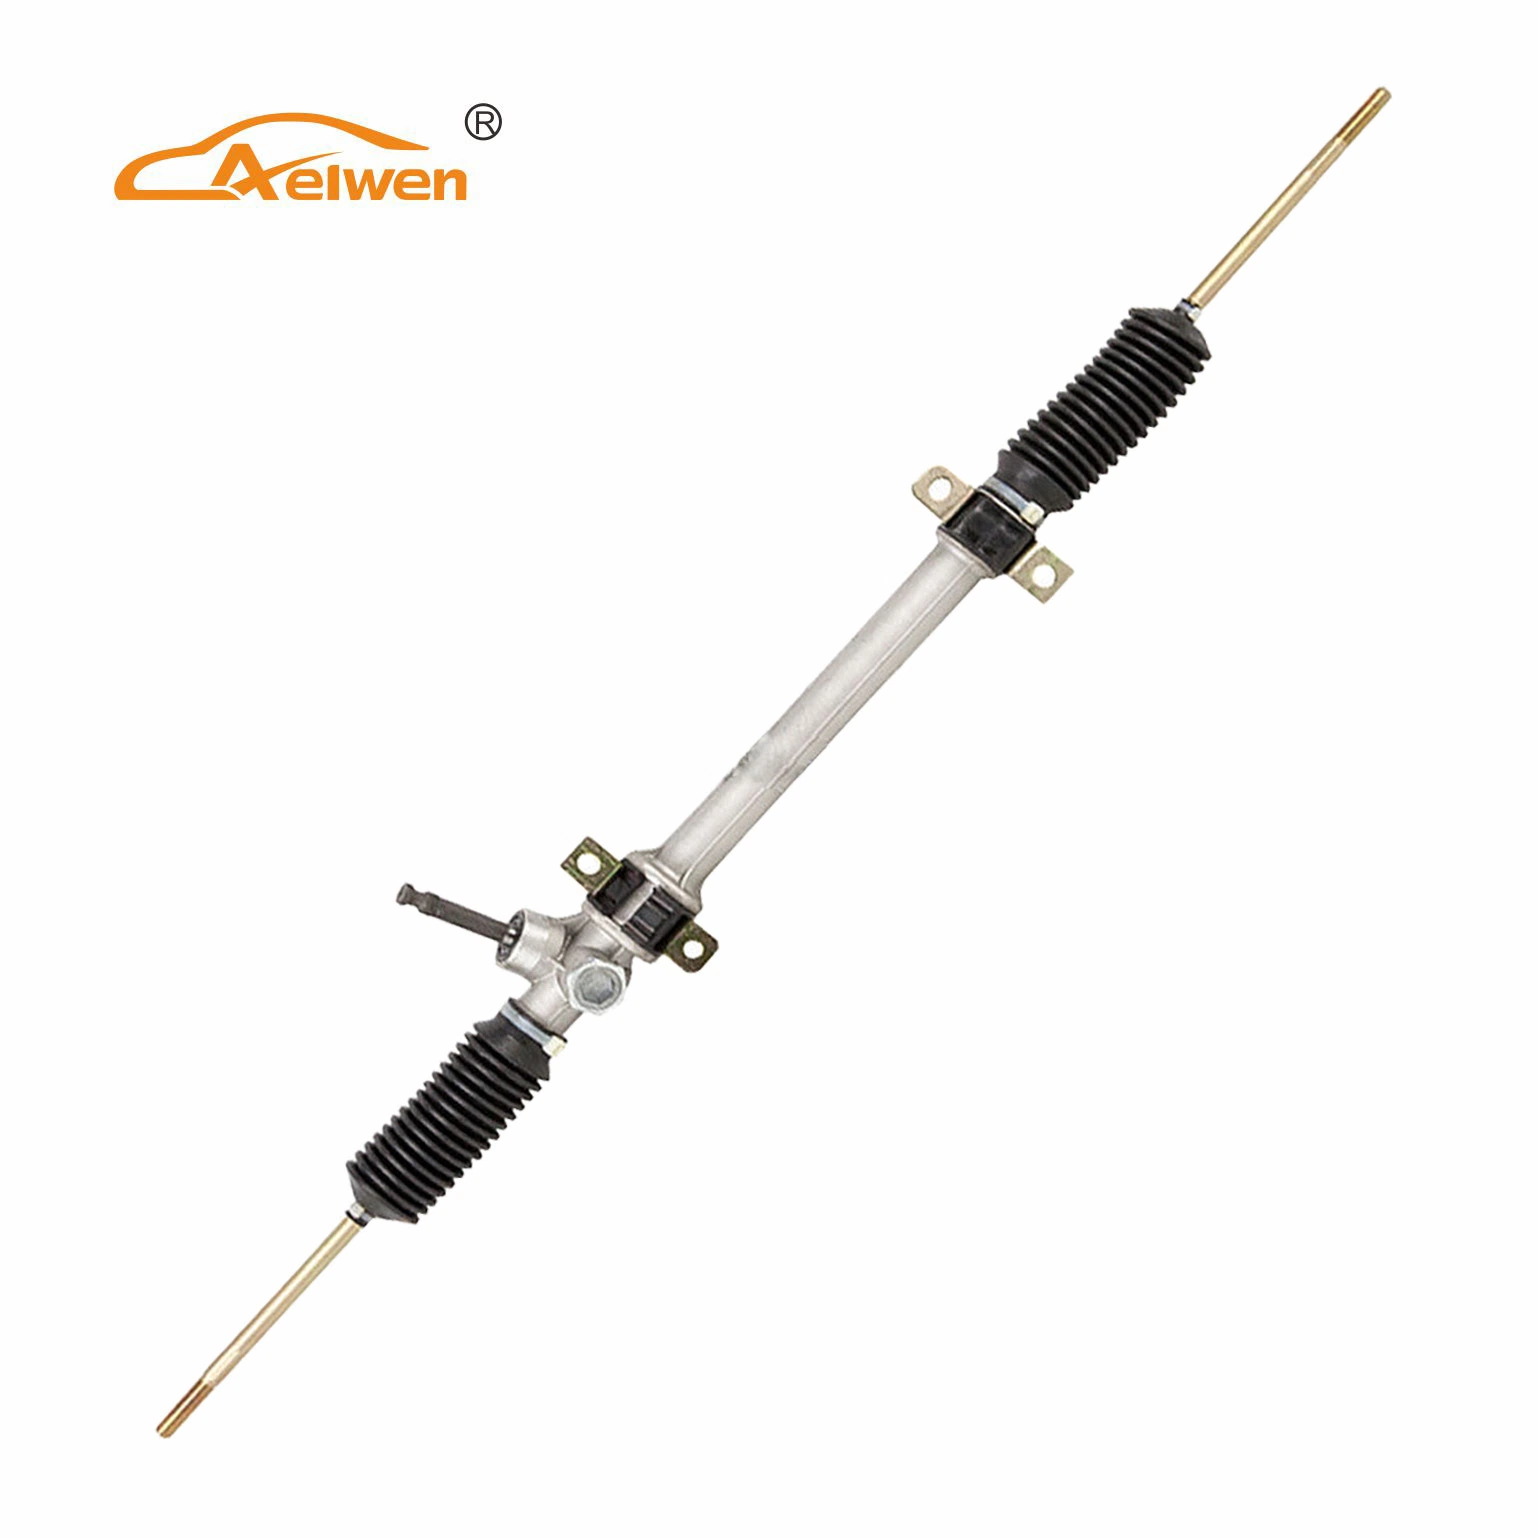 Aelwen High Quality Auto Steering Parts Left Hand Car Steering Gear Fit for KIA for Rio 00- 57700fd000